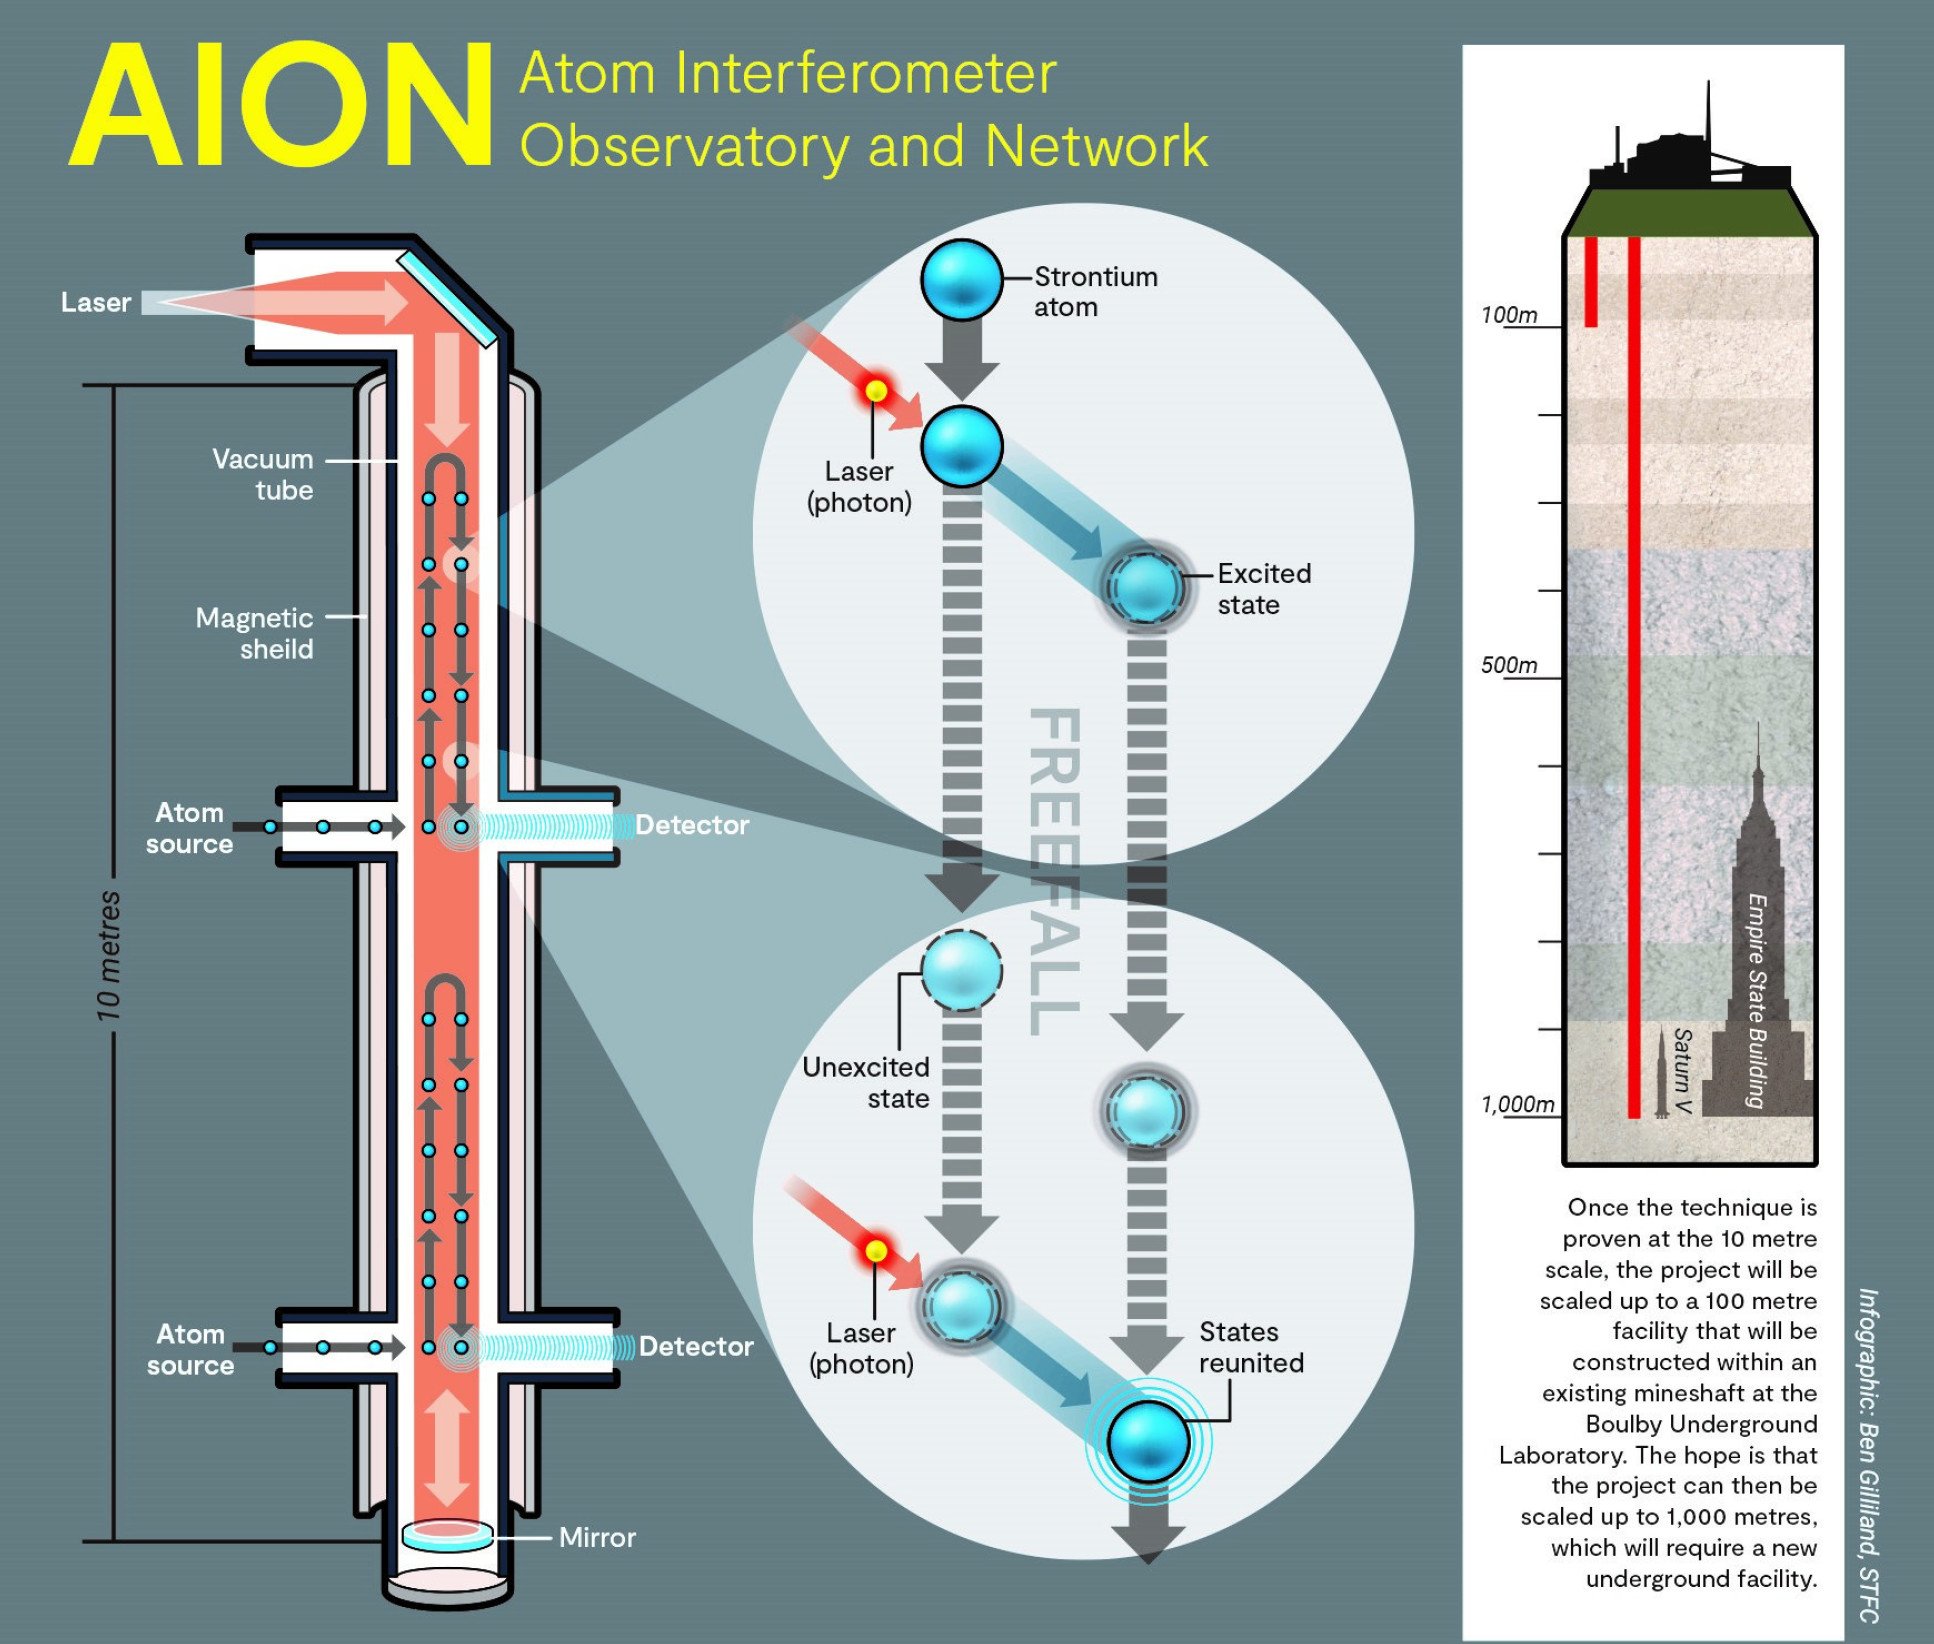 Concept for the AION interferometer